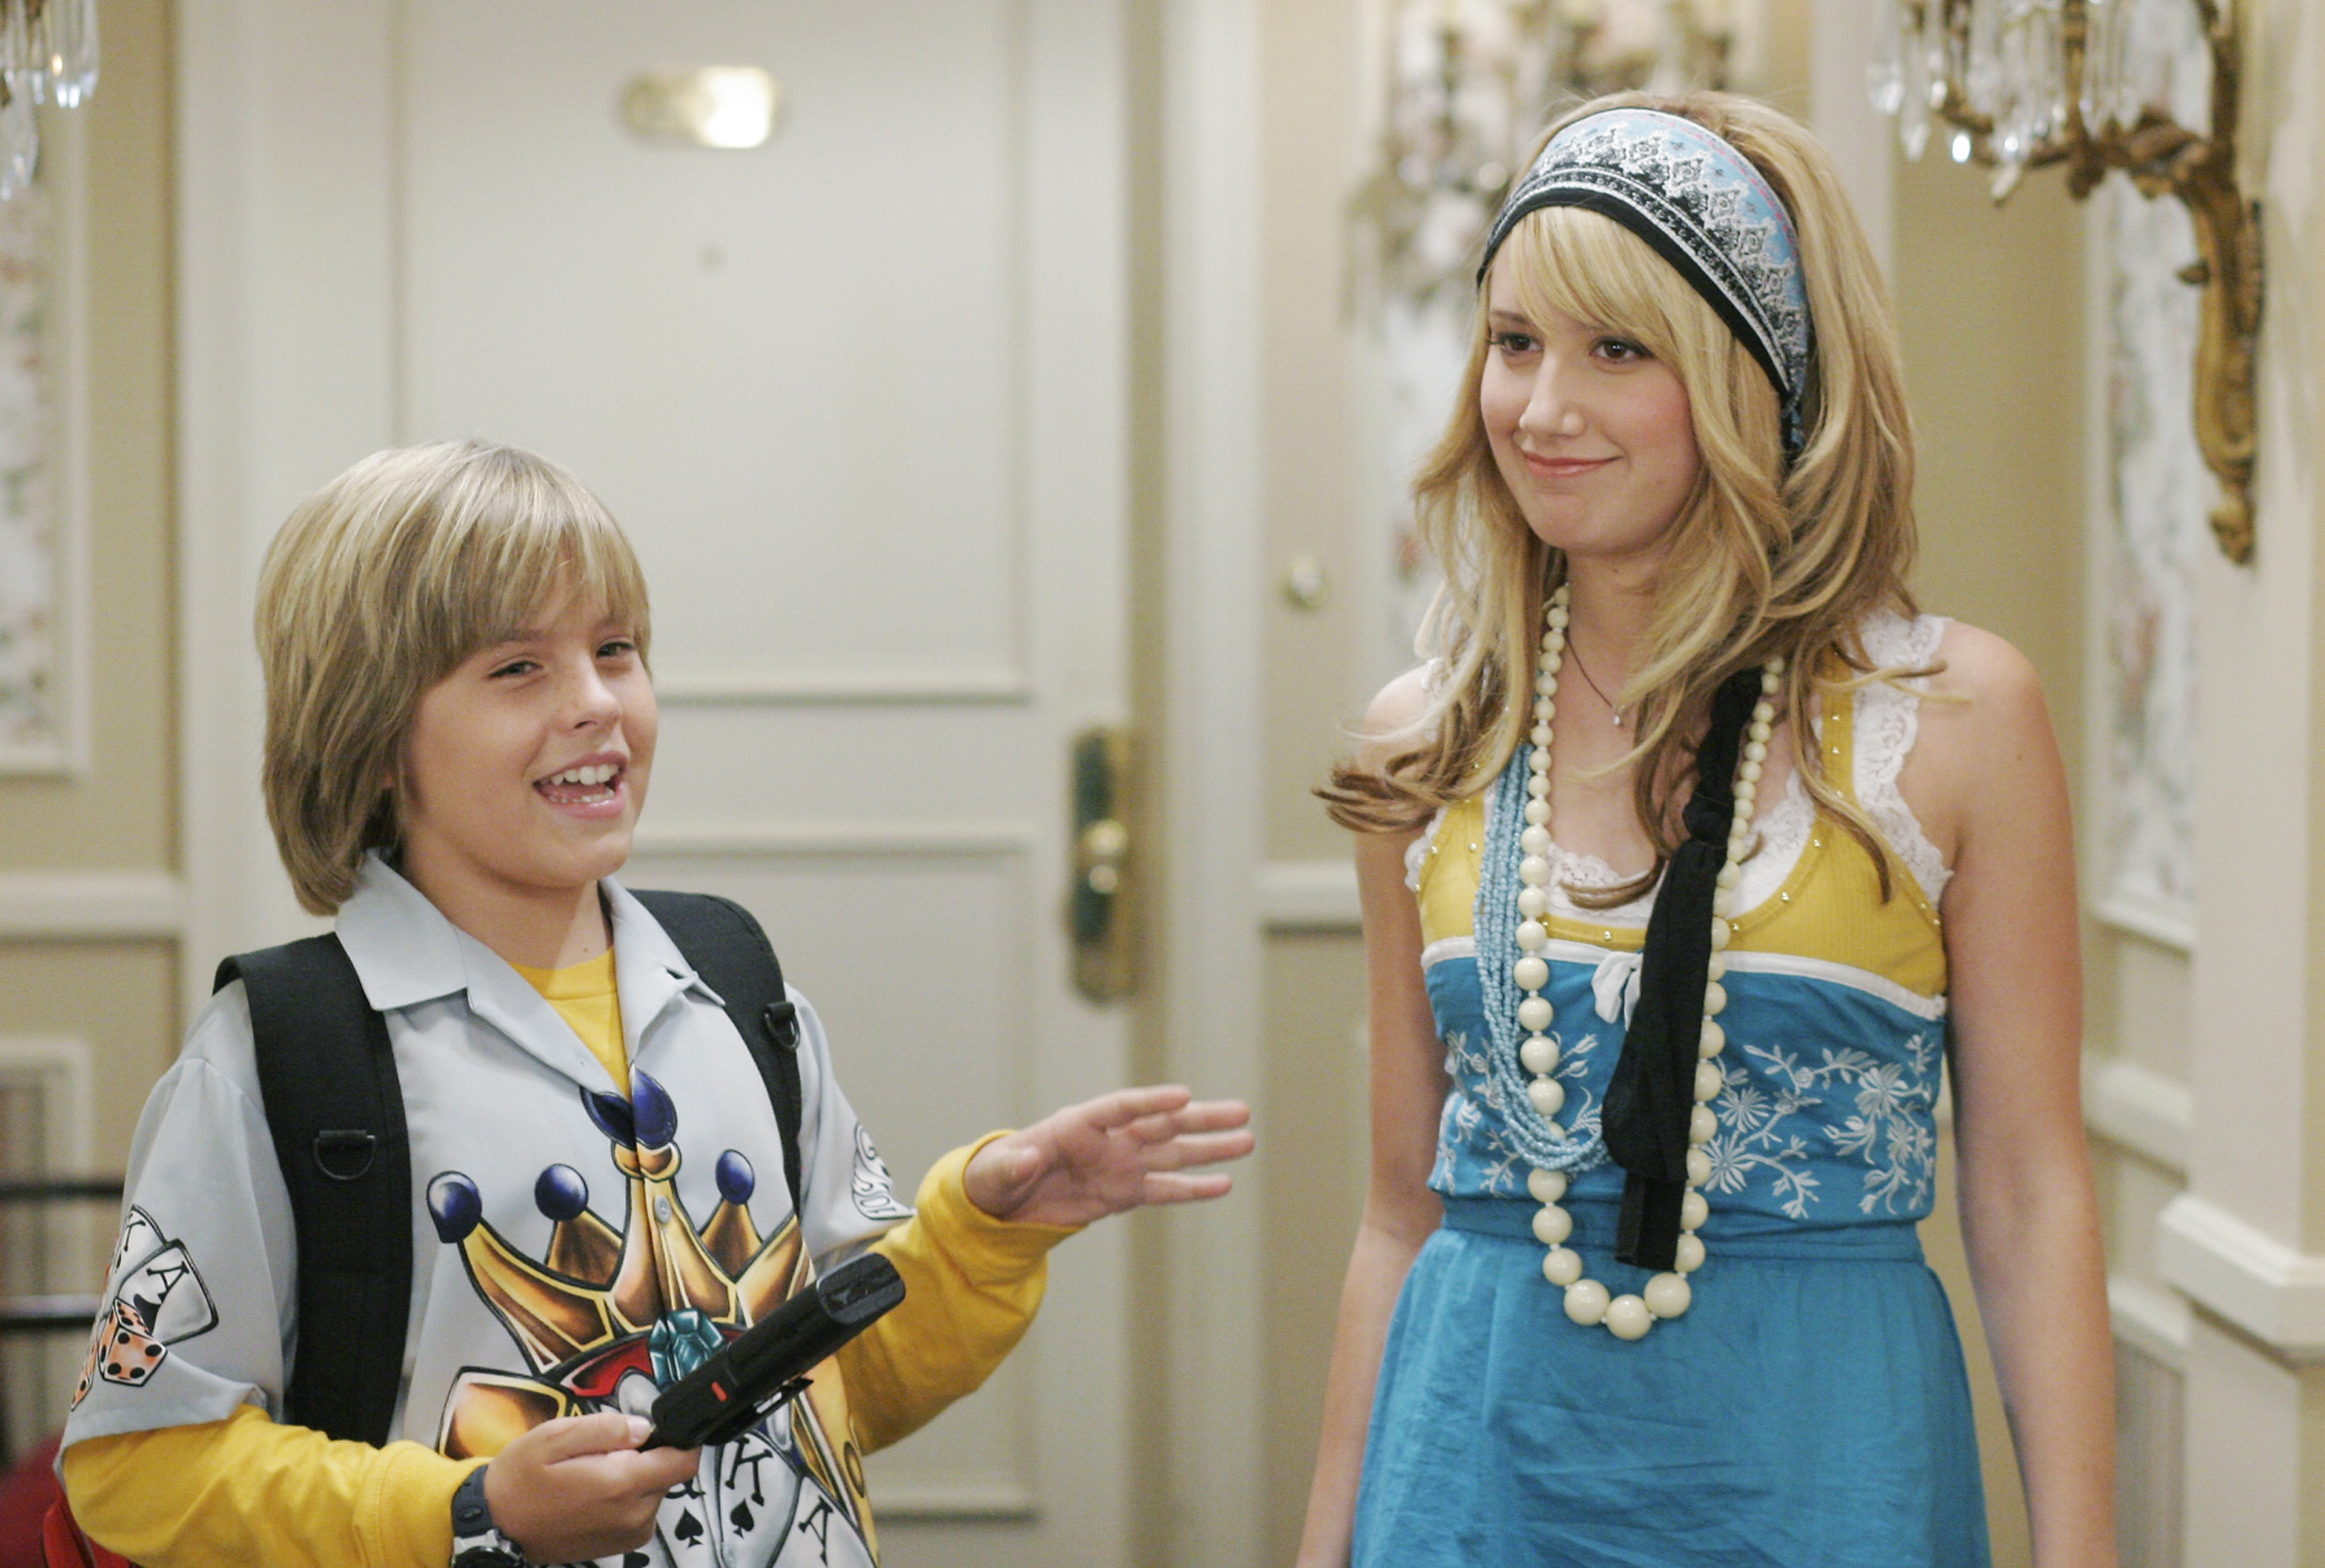 Dylan Sprouse in The Suite Life of Zack and Cody (Season 2)